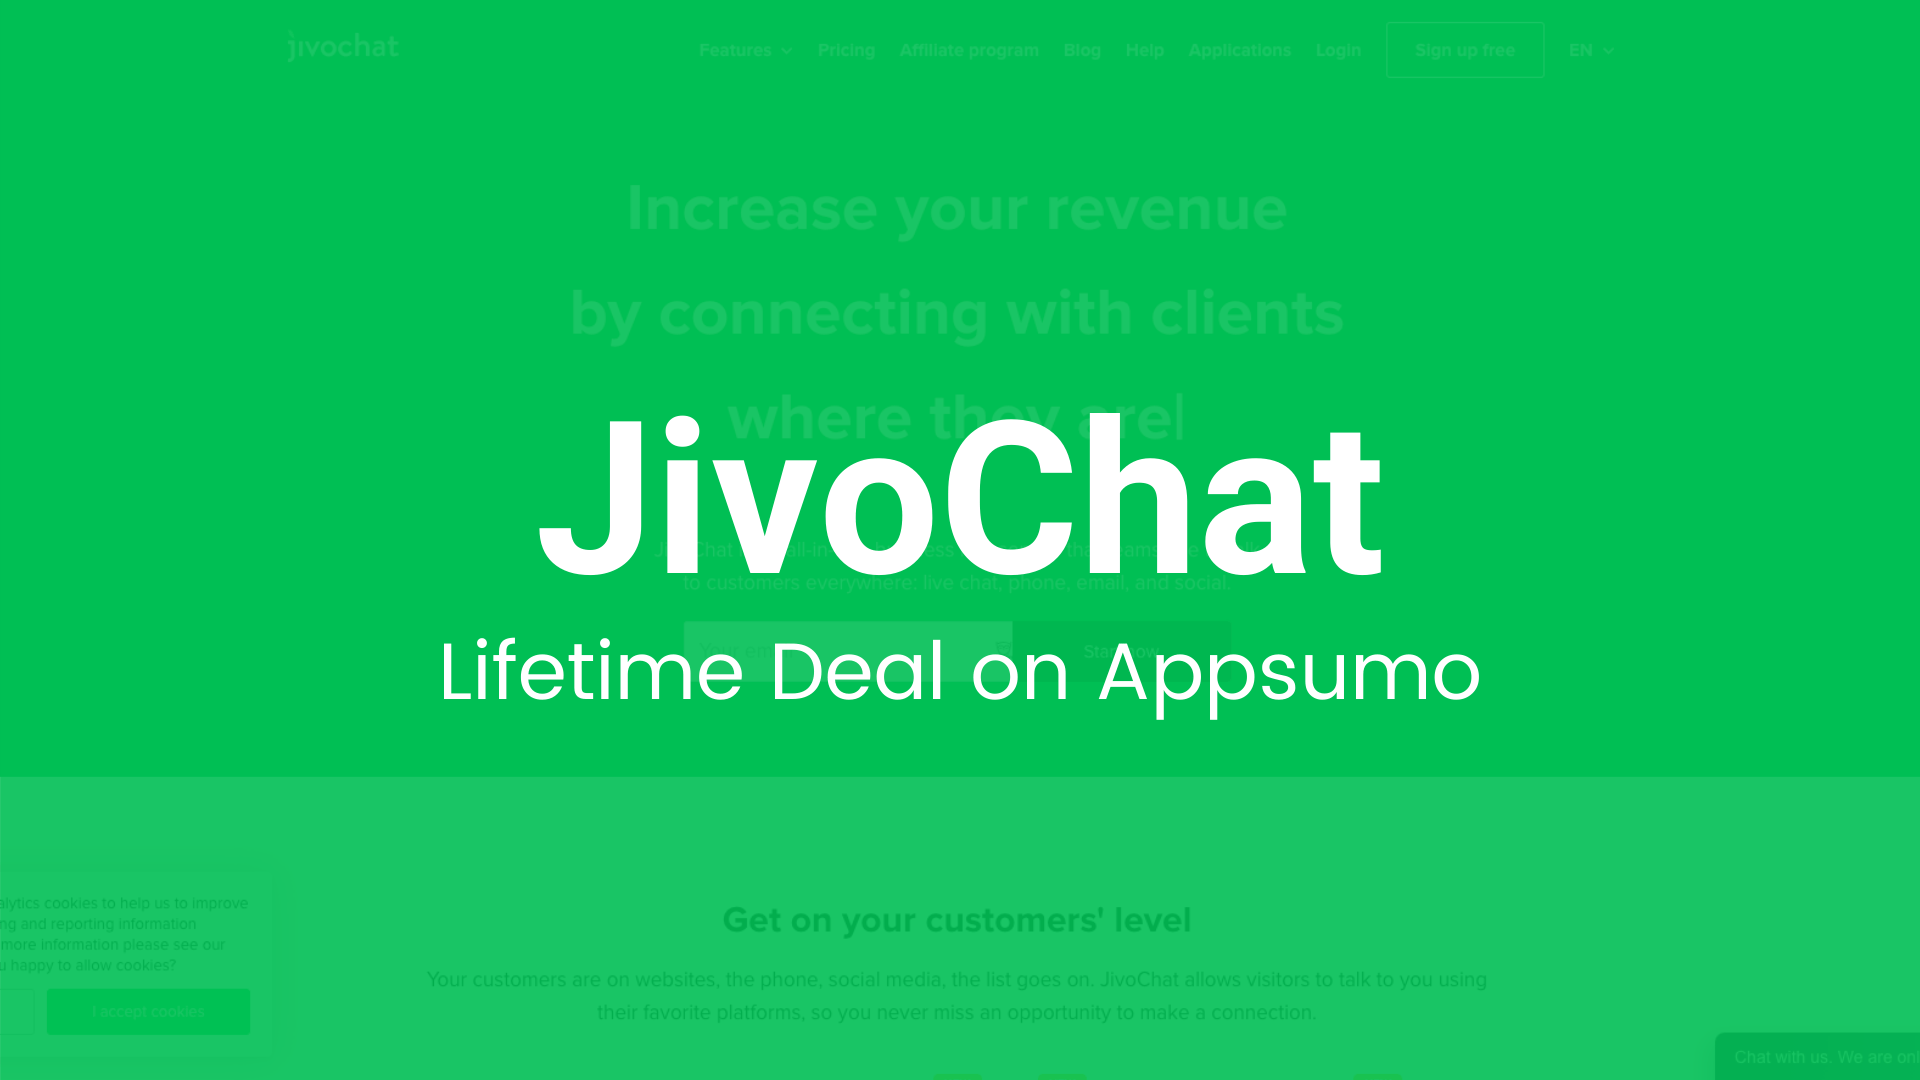 JivoChat: Realtime Chat Service to Upgrade Your Customer Service